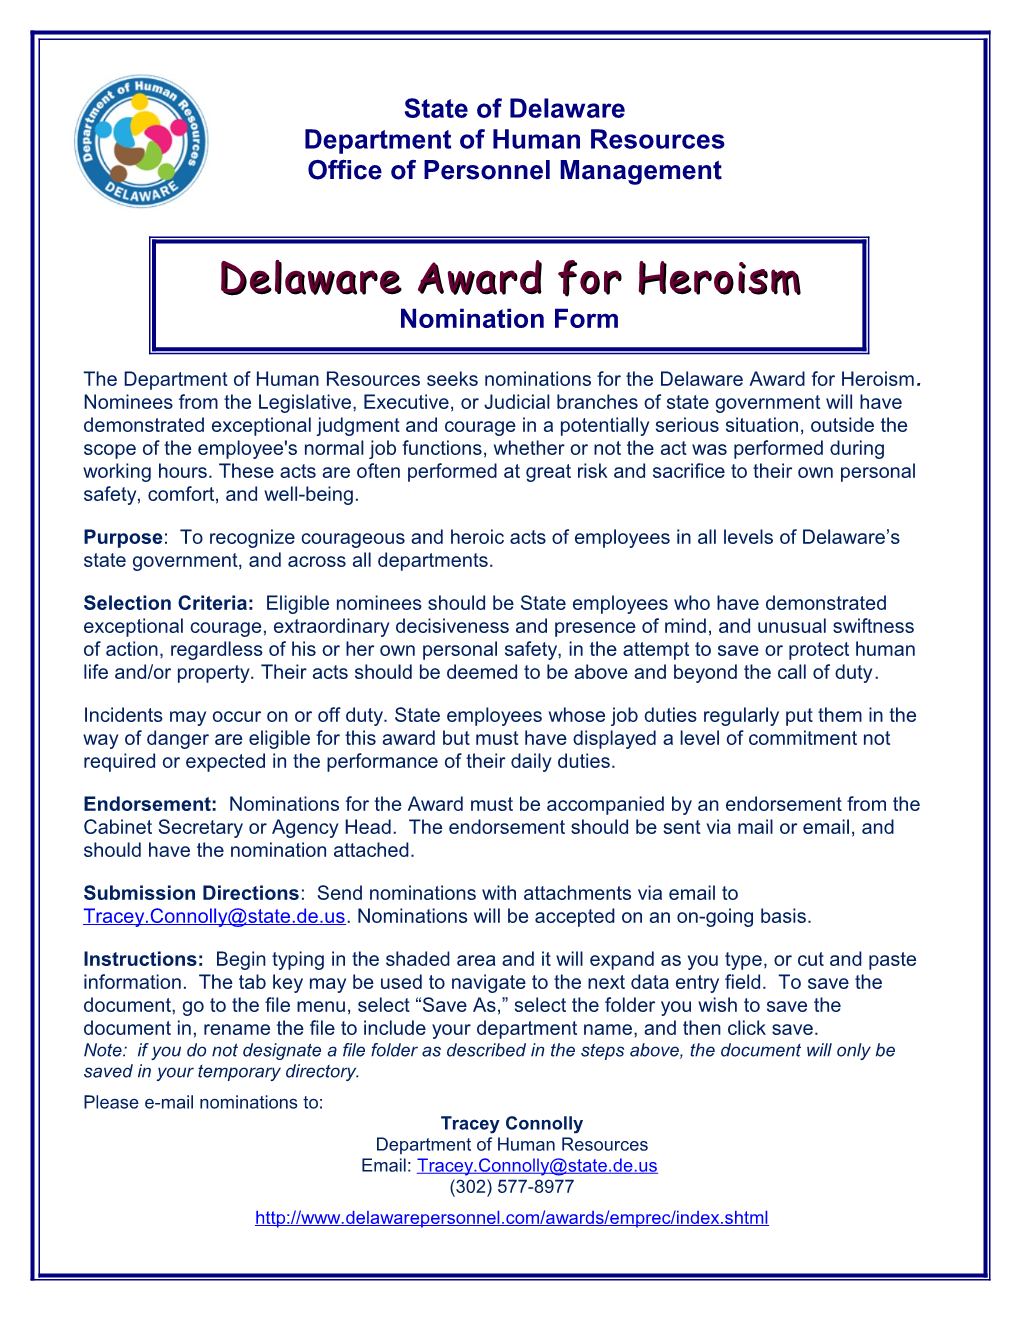 Delaware Award for Excellence